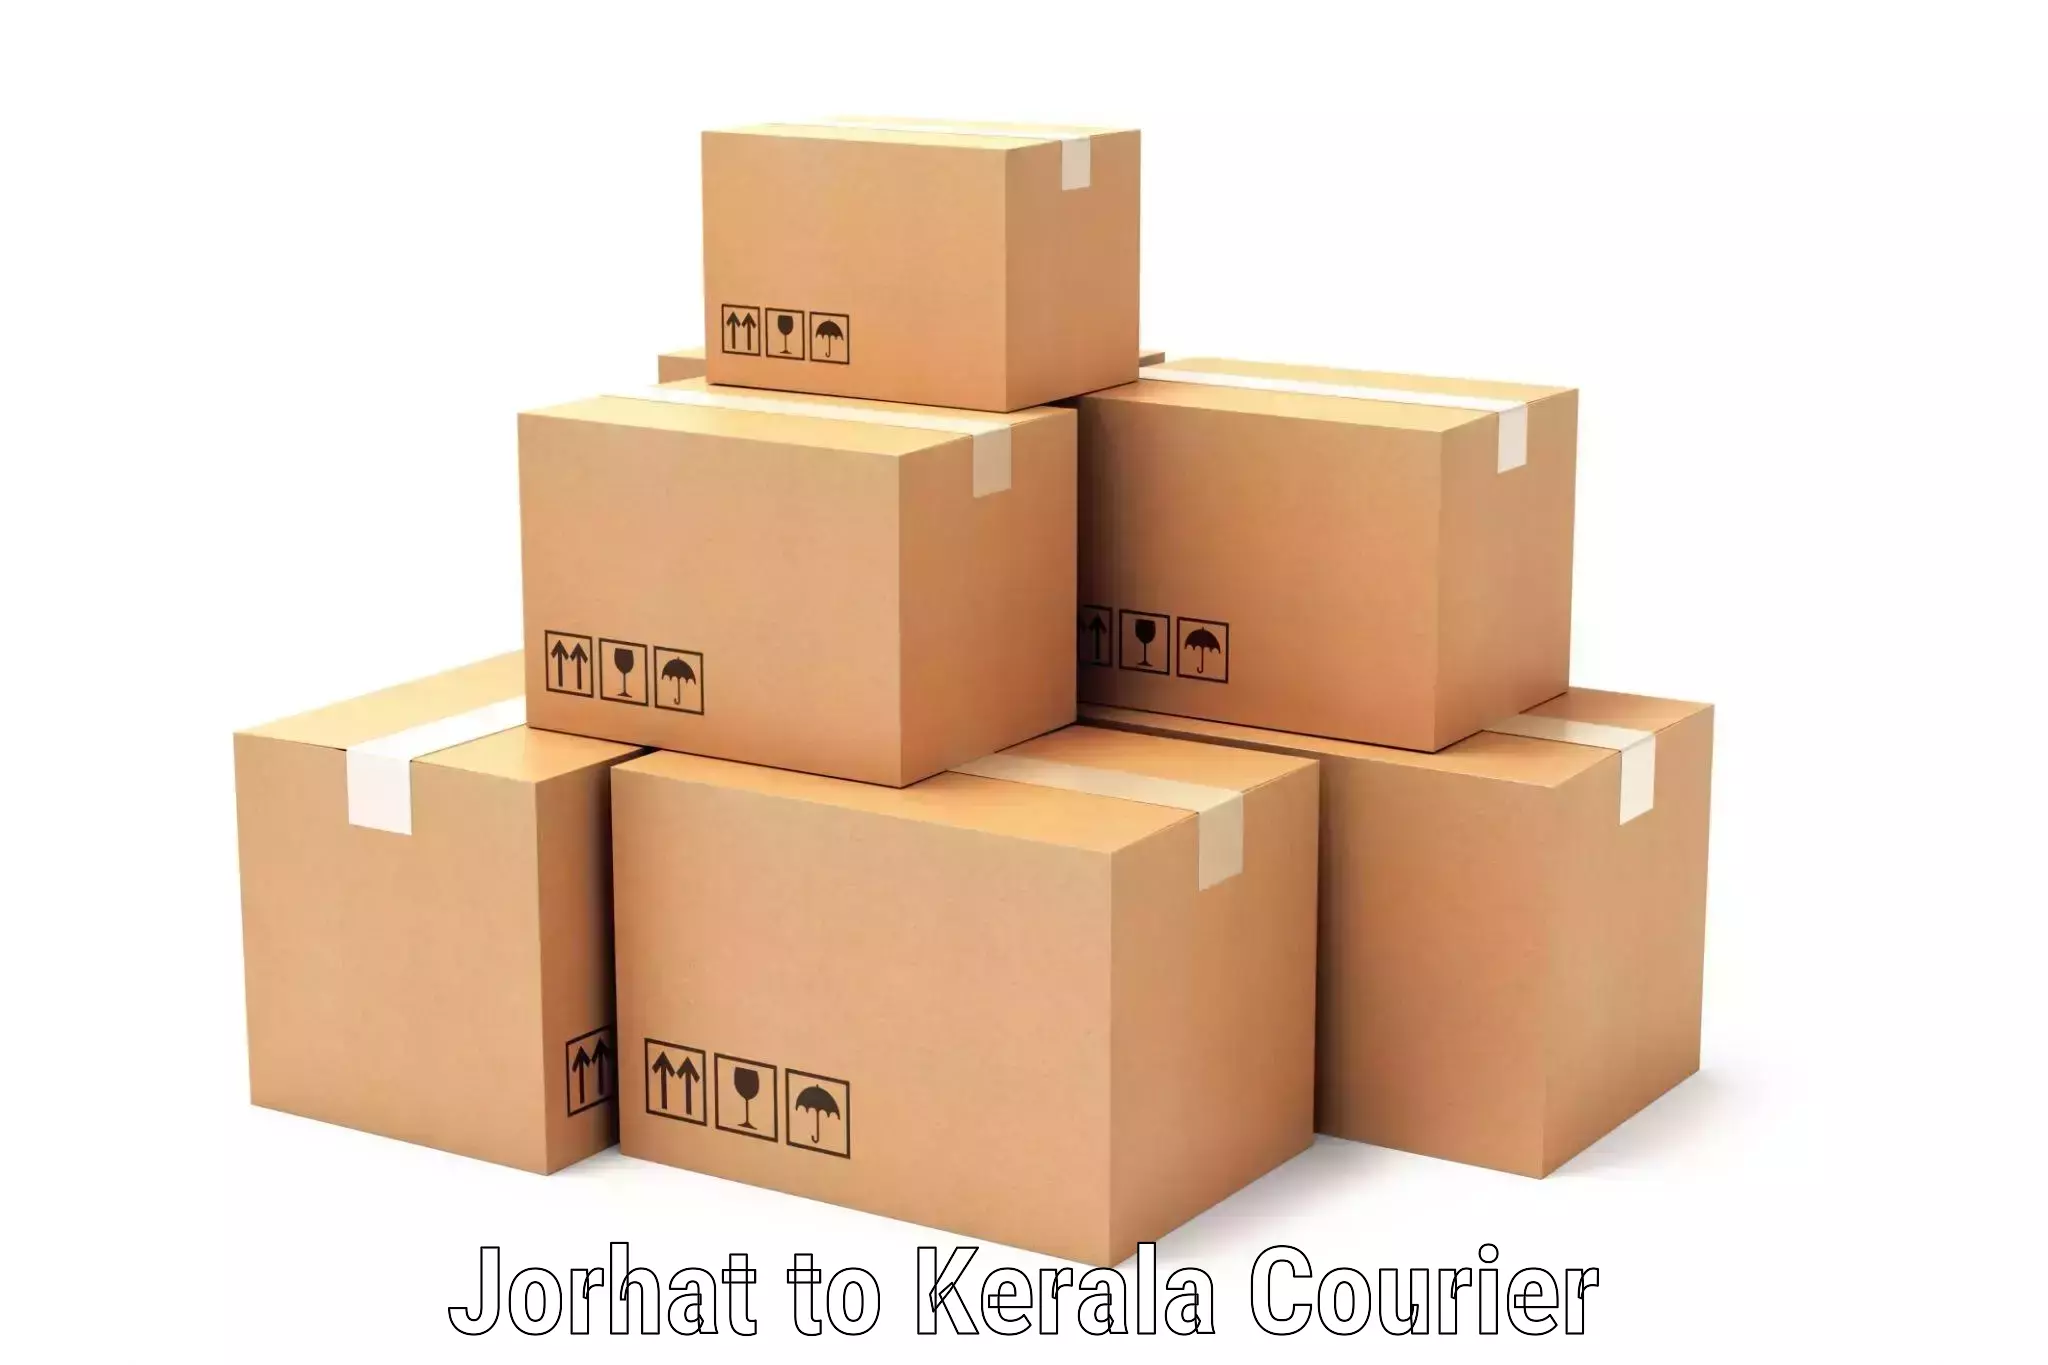 24-hour courier services Jorhat to Thamarassery